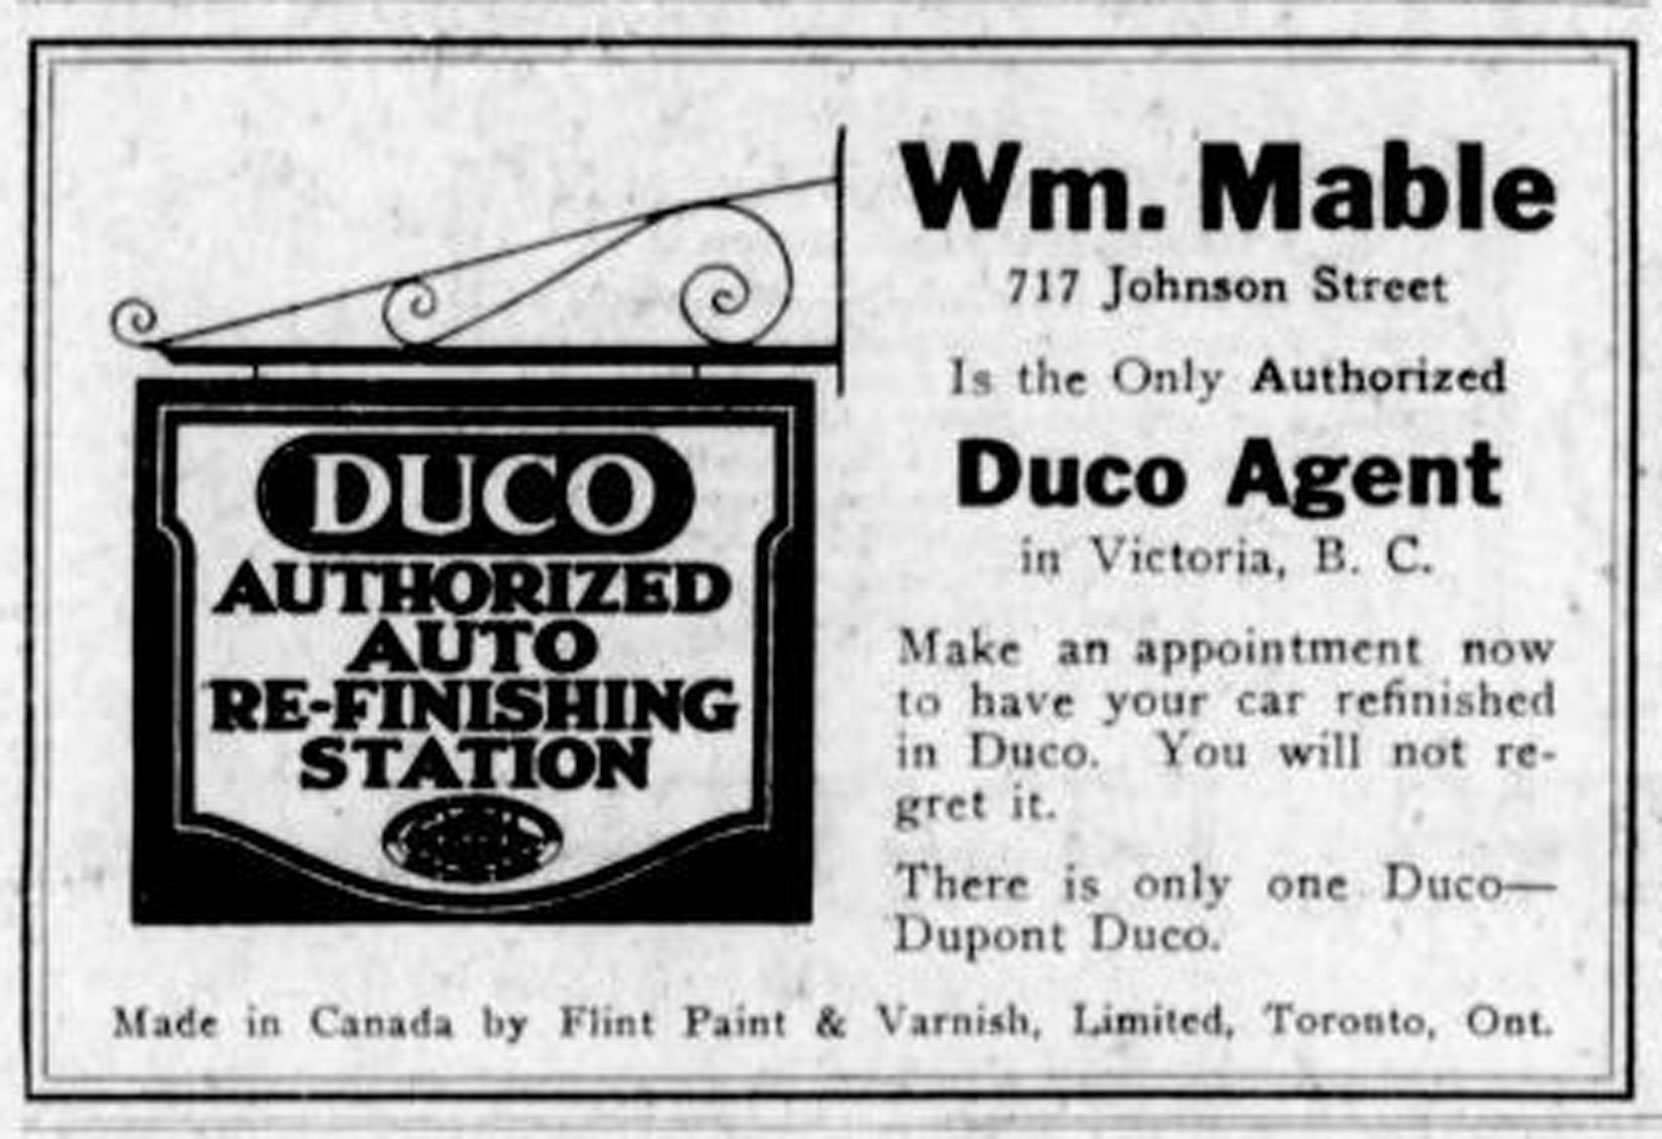 1926 advertisement for William Mable, 717 Johnson Street. showing the former Mable carriage making business changed into auto body work. (Victoria Online Sightseeing Tours collection)